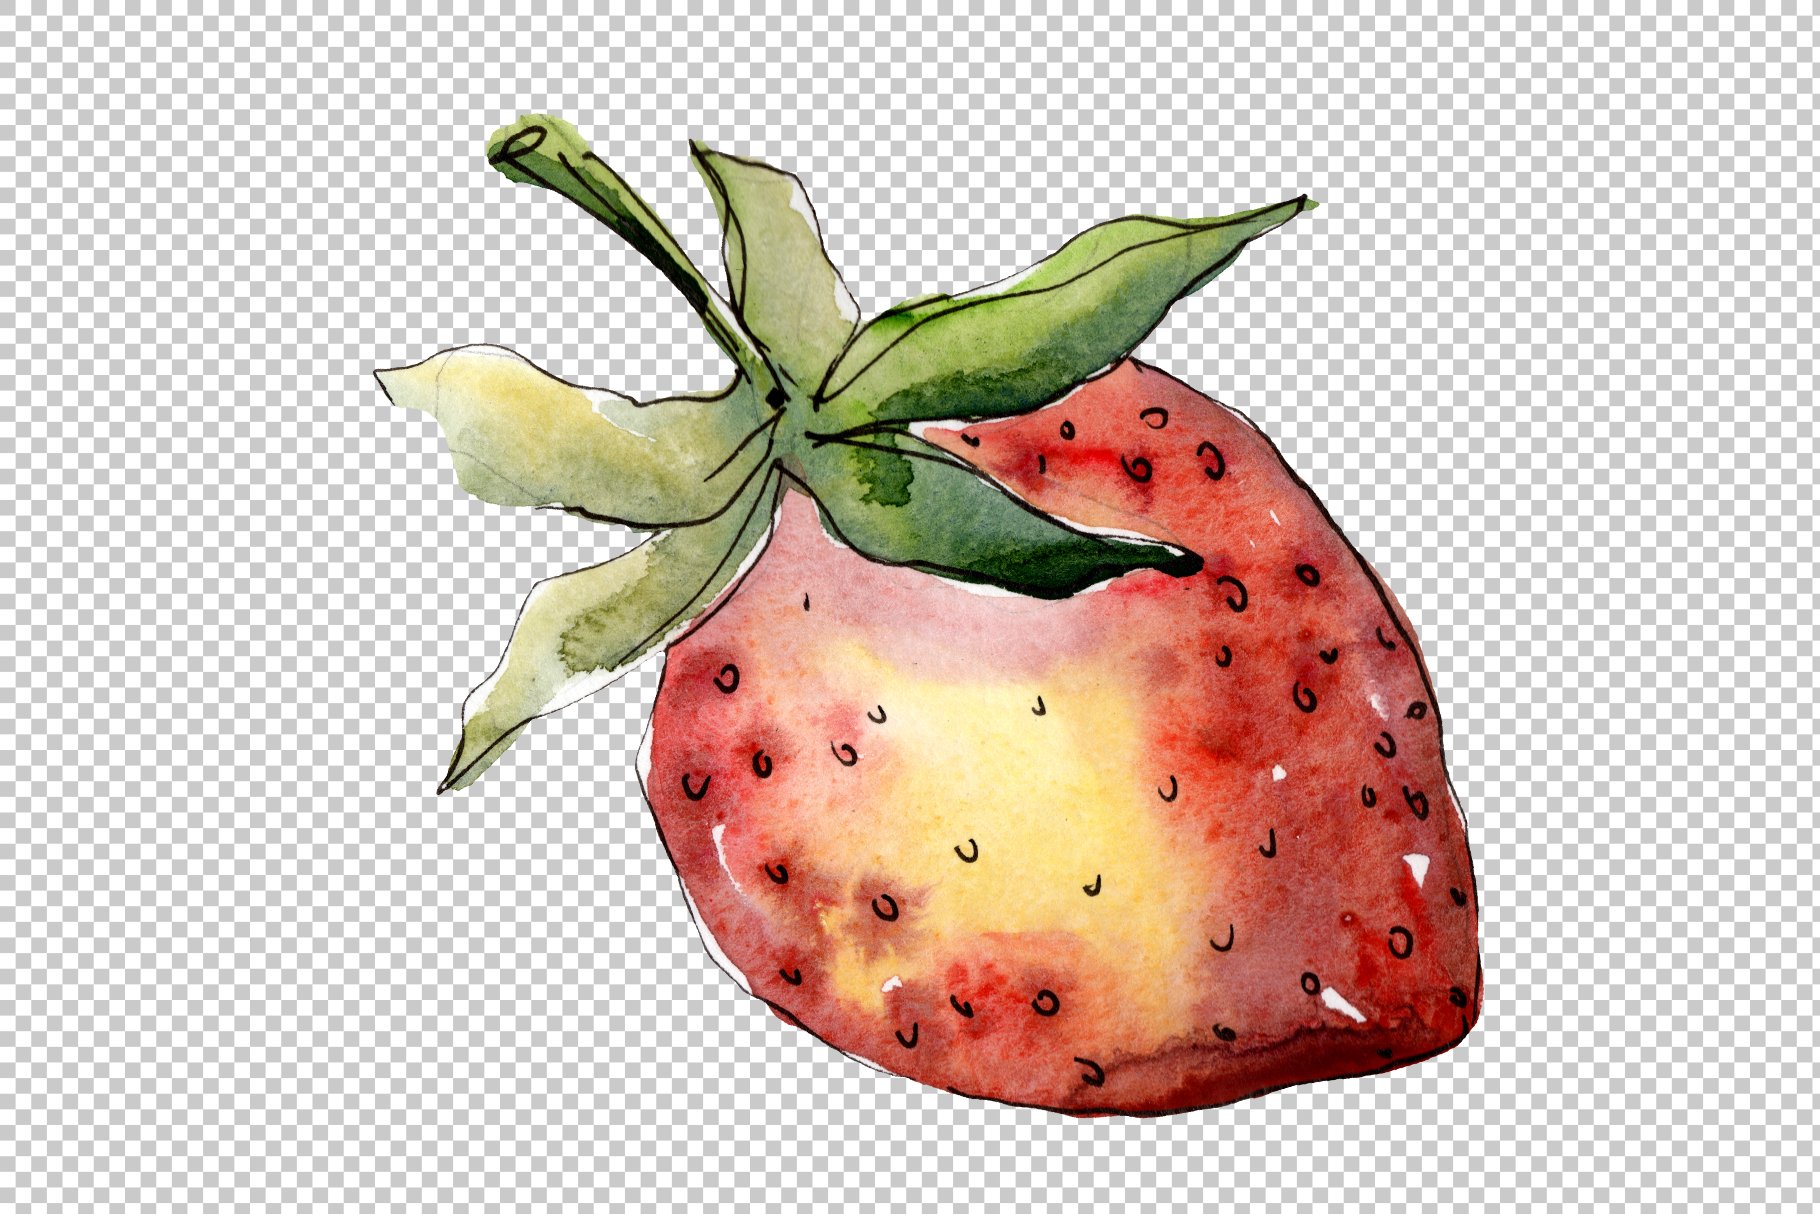 Hand painted strawberry in a watercolor.